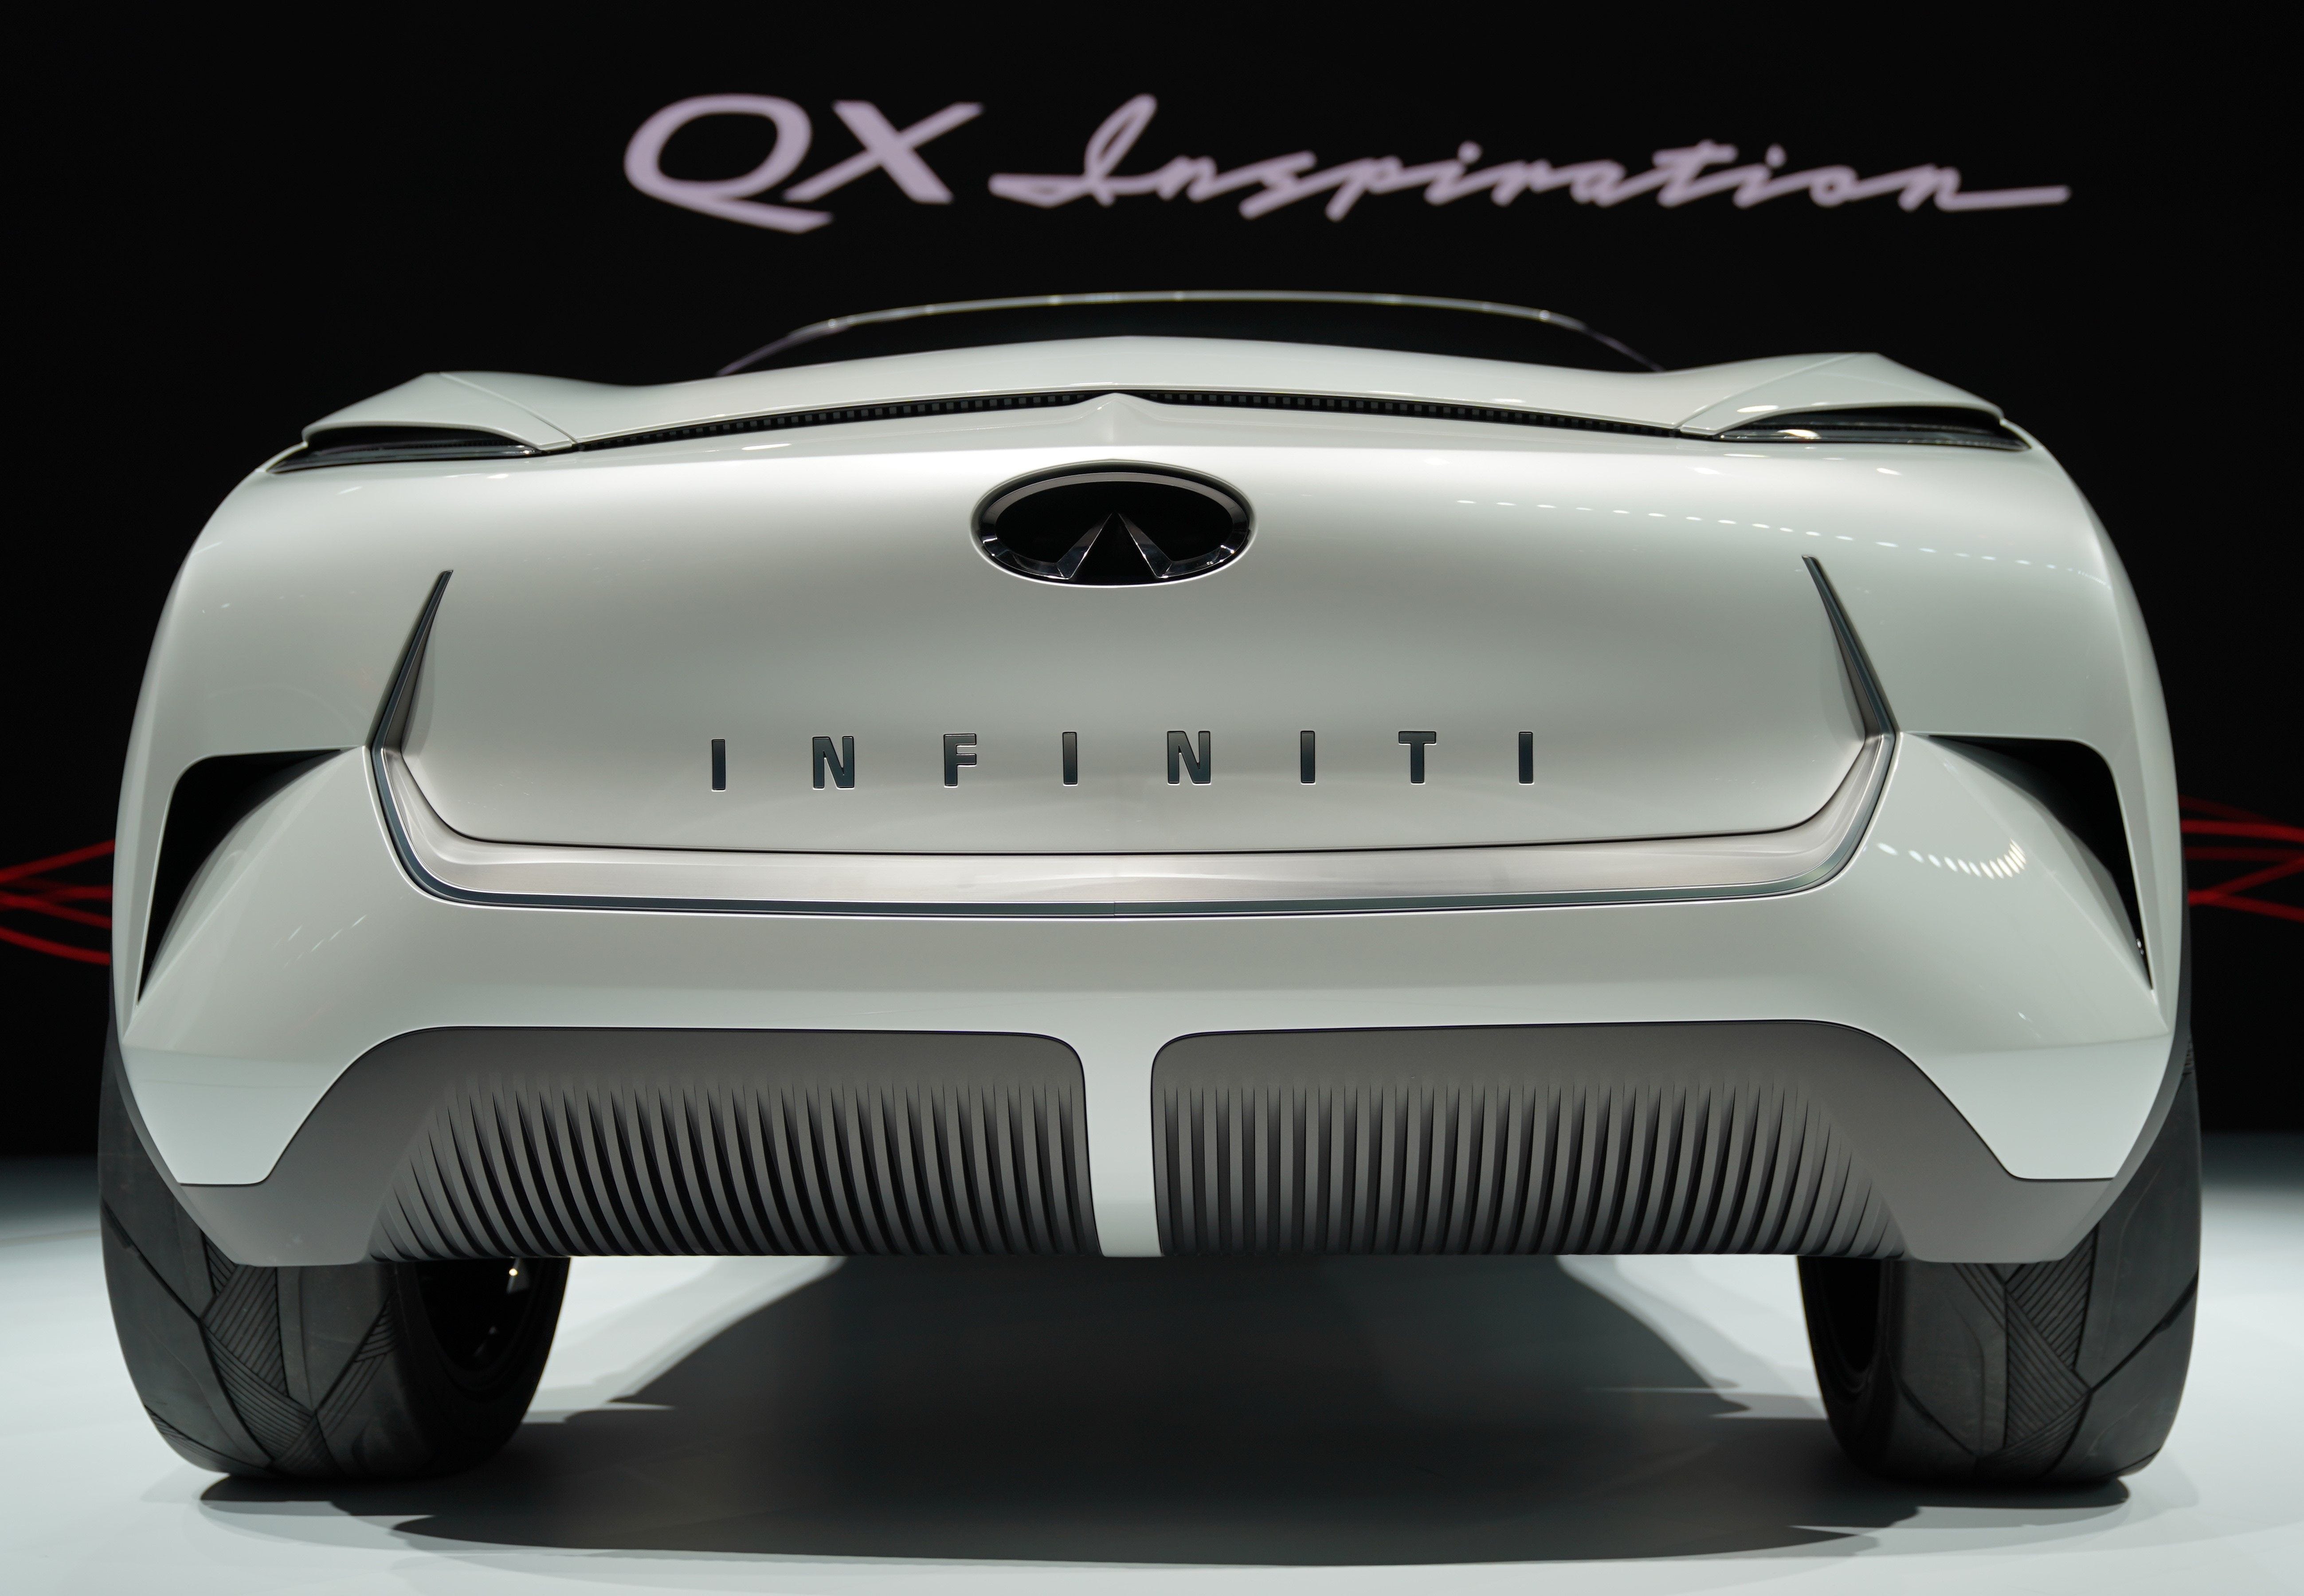 Nissan luxury brand Infiniti debuted the QX Inspiration EV concept car at the Detroit auto show Monday.